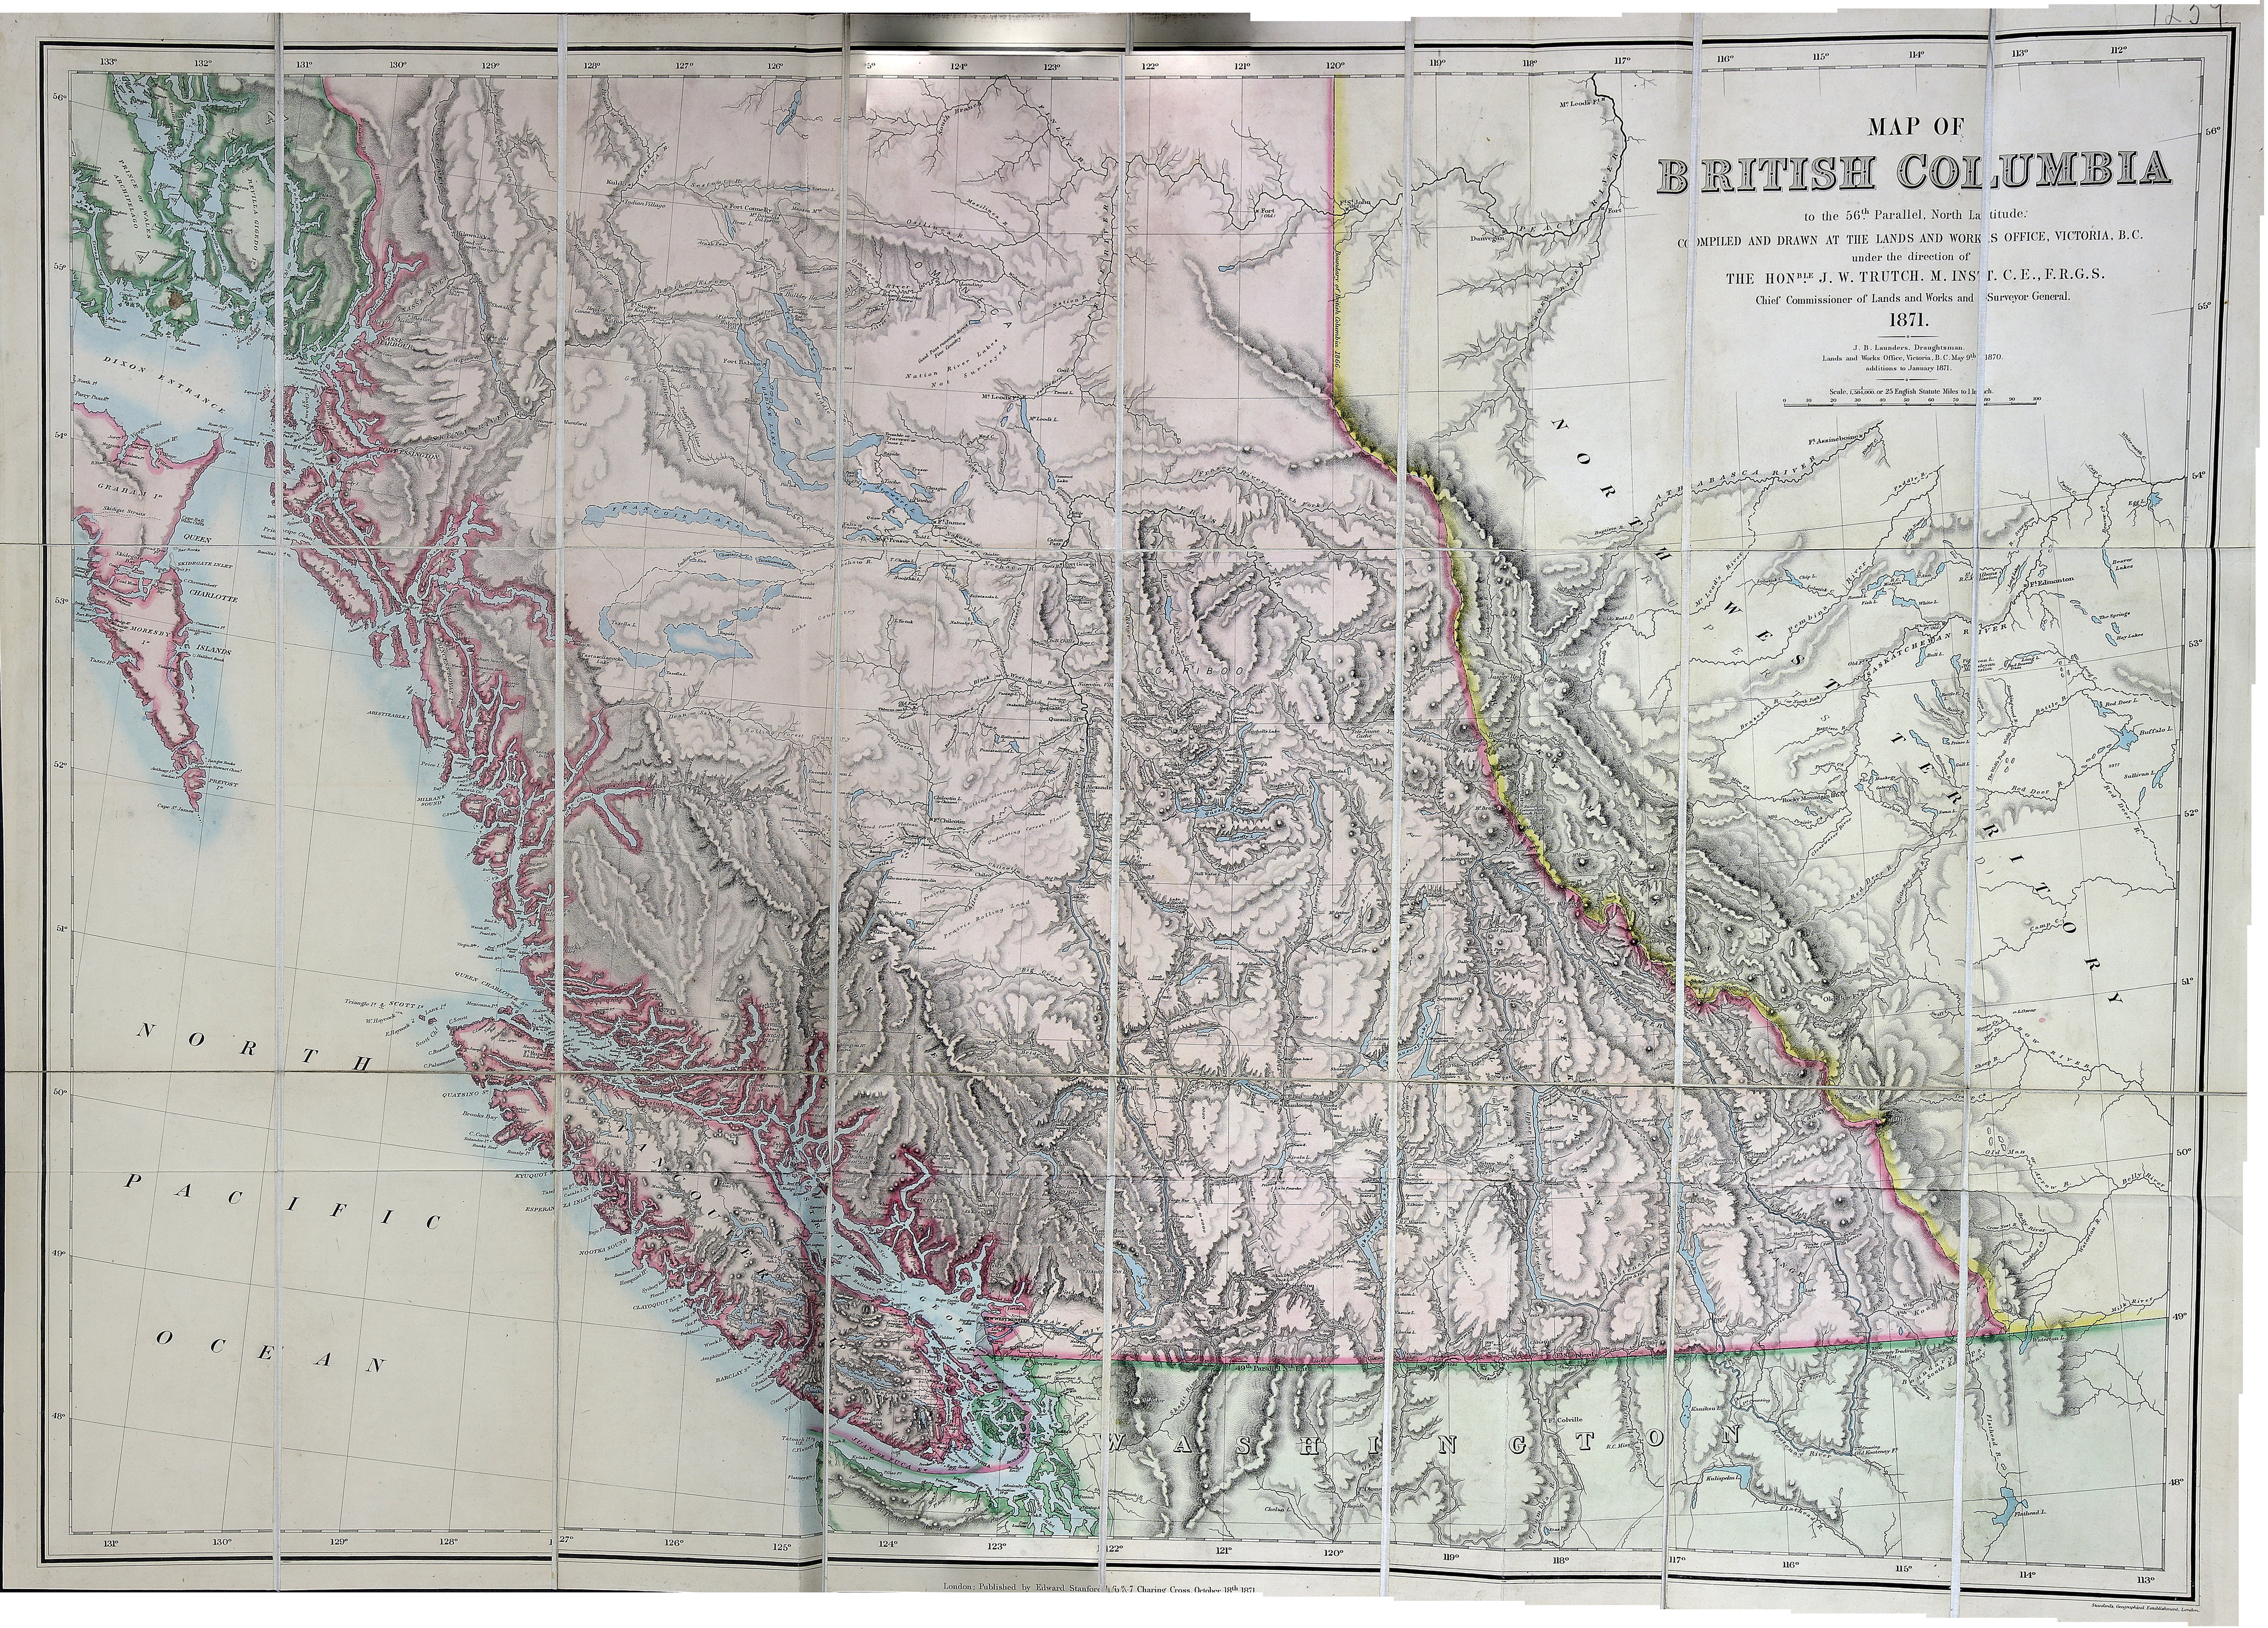 Map of British Columbia to the 56th Parallel North Latitude.